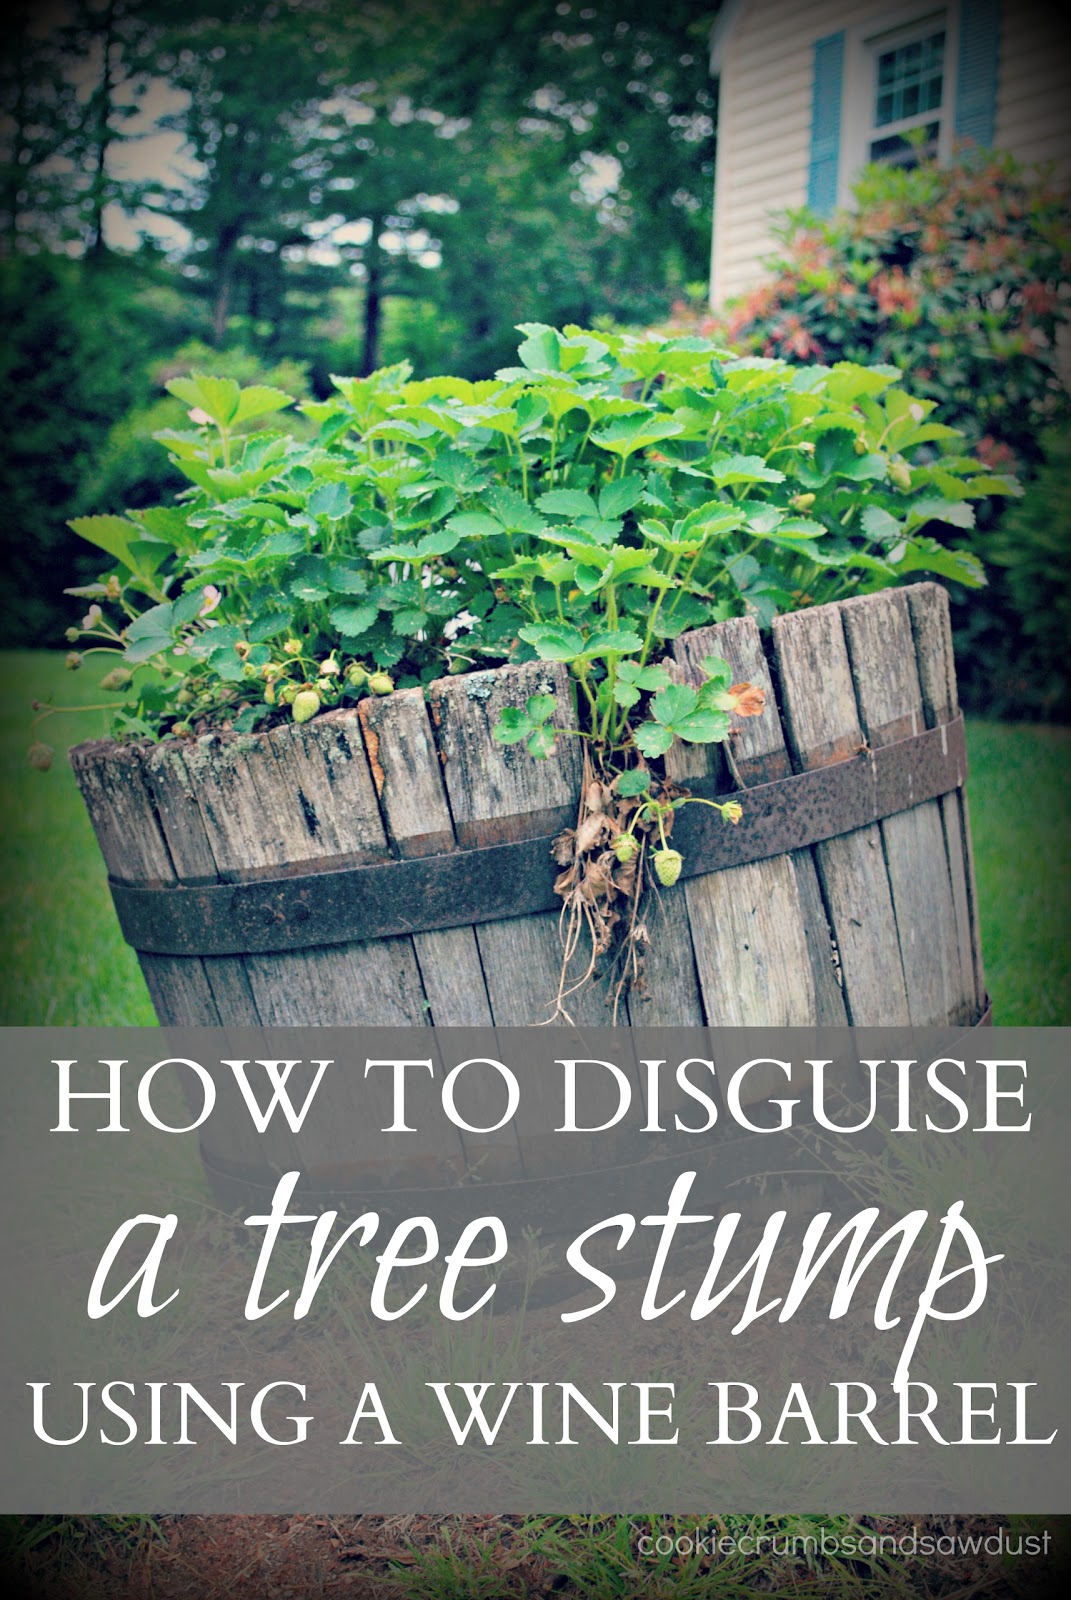 Cookie Crumbs &amp; Sawdust: how to disguise a tree stump